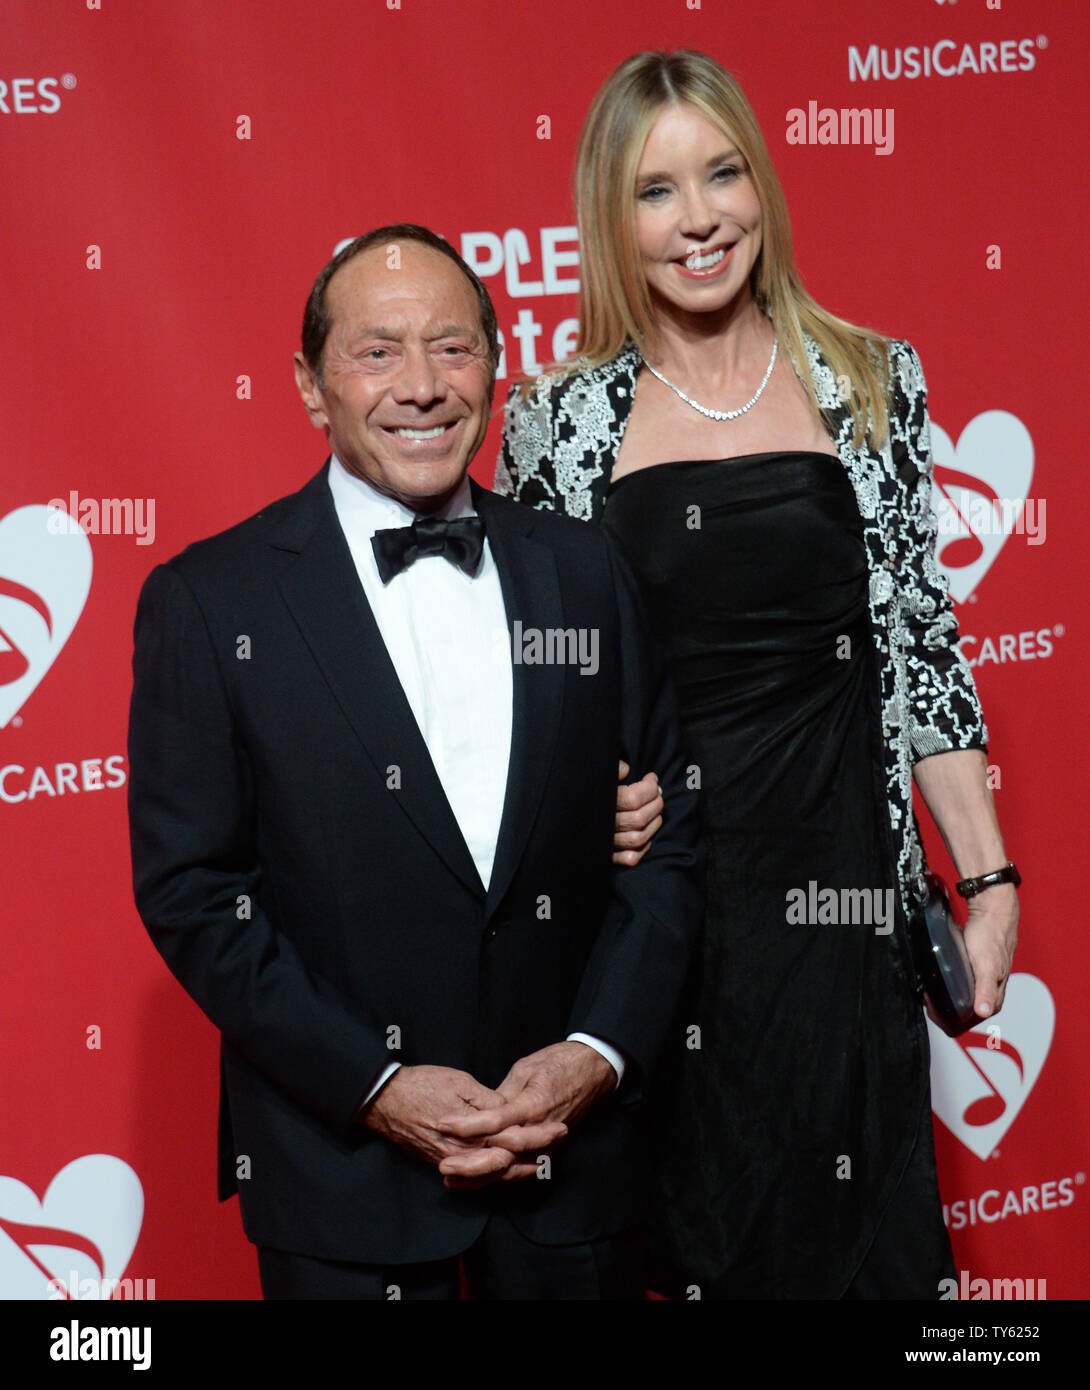 Singer and songwriter Paul Anka and Lisa Lisa Pemberton arrive for the  MusiCares Person of the Year gala held at the Los Angeles Convention Center  in Los Angeles on February 13, 2016.